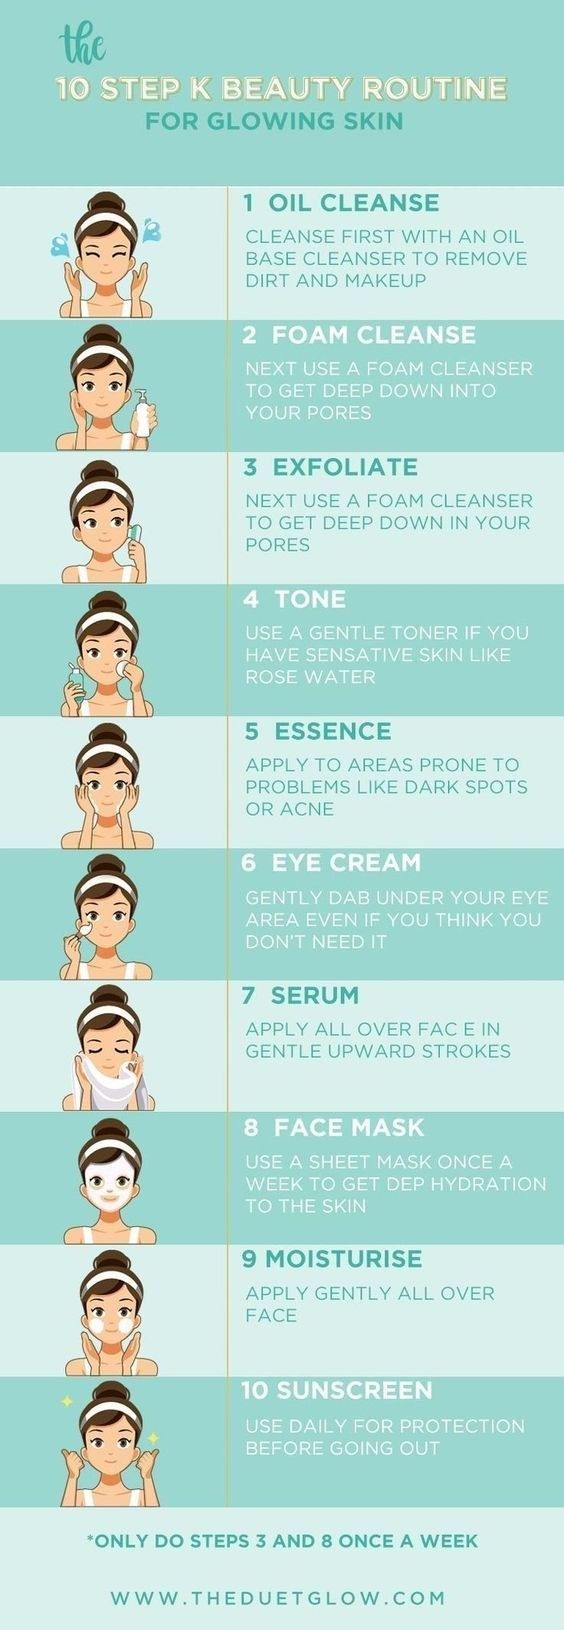 16 Skincare Cheat Sheets That Are Actually Useful - 16 Skincare Cheat Sheets That Are Actually Useful -   17 beauty Routines products ideas